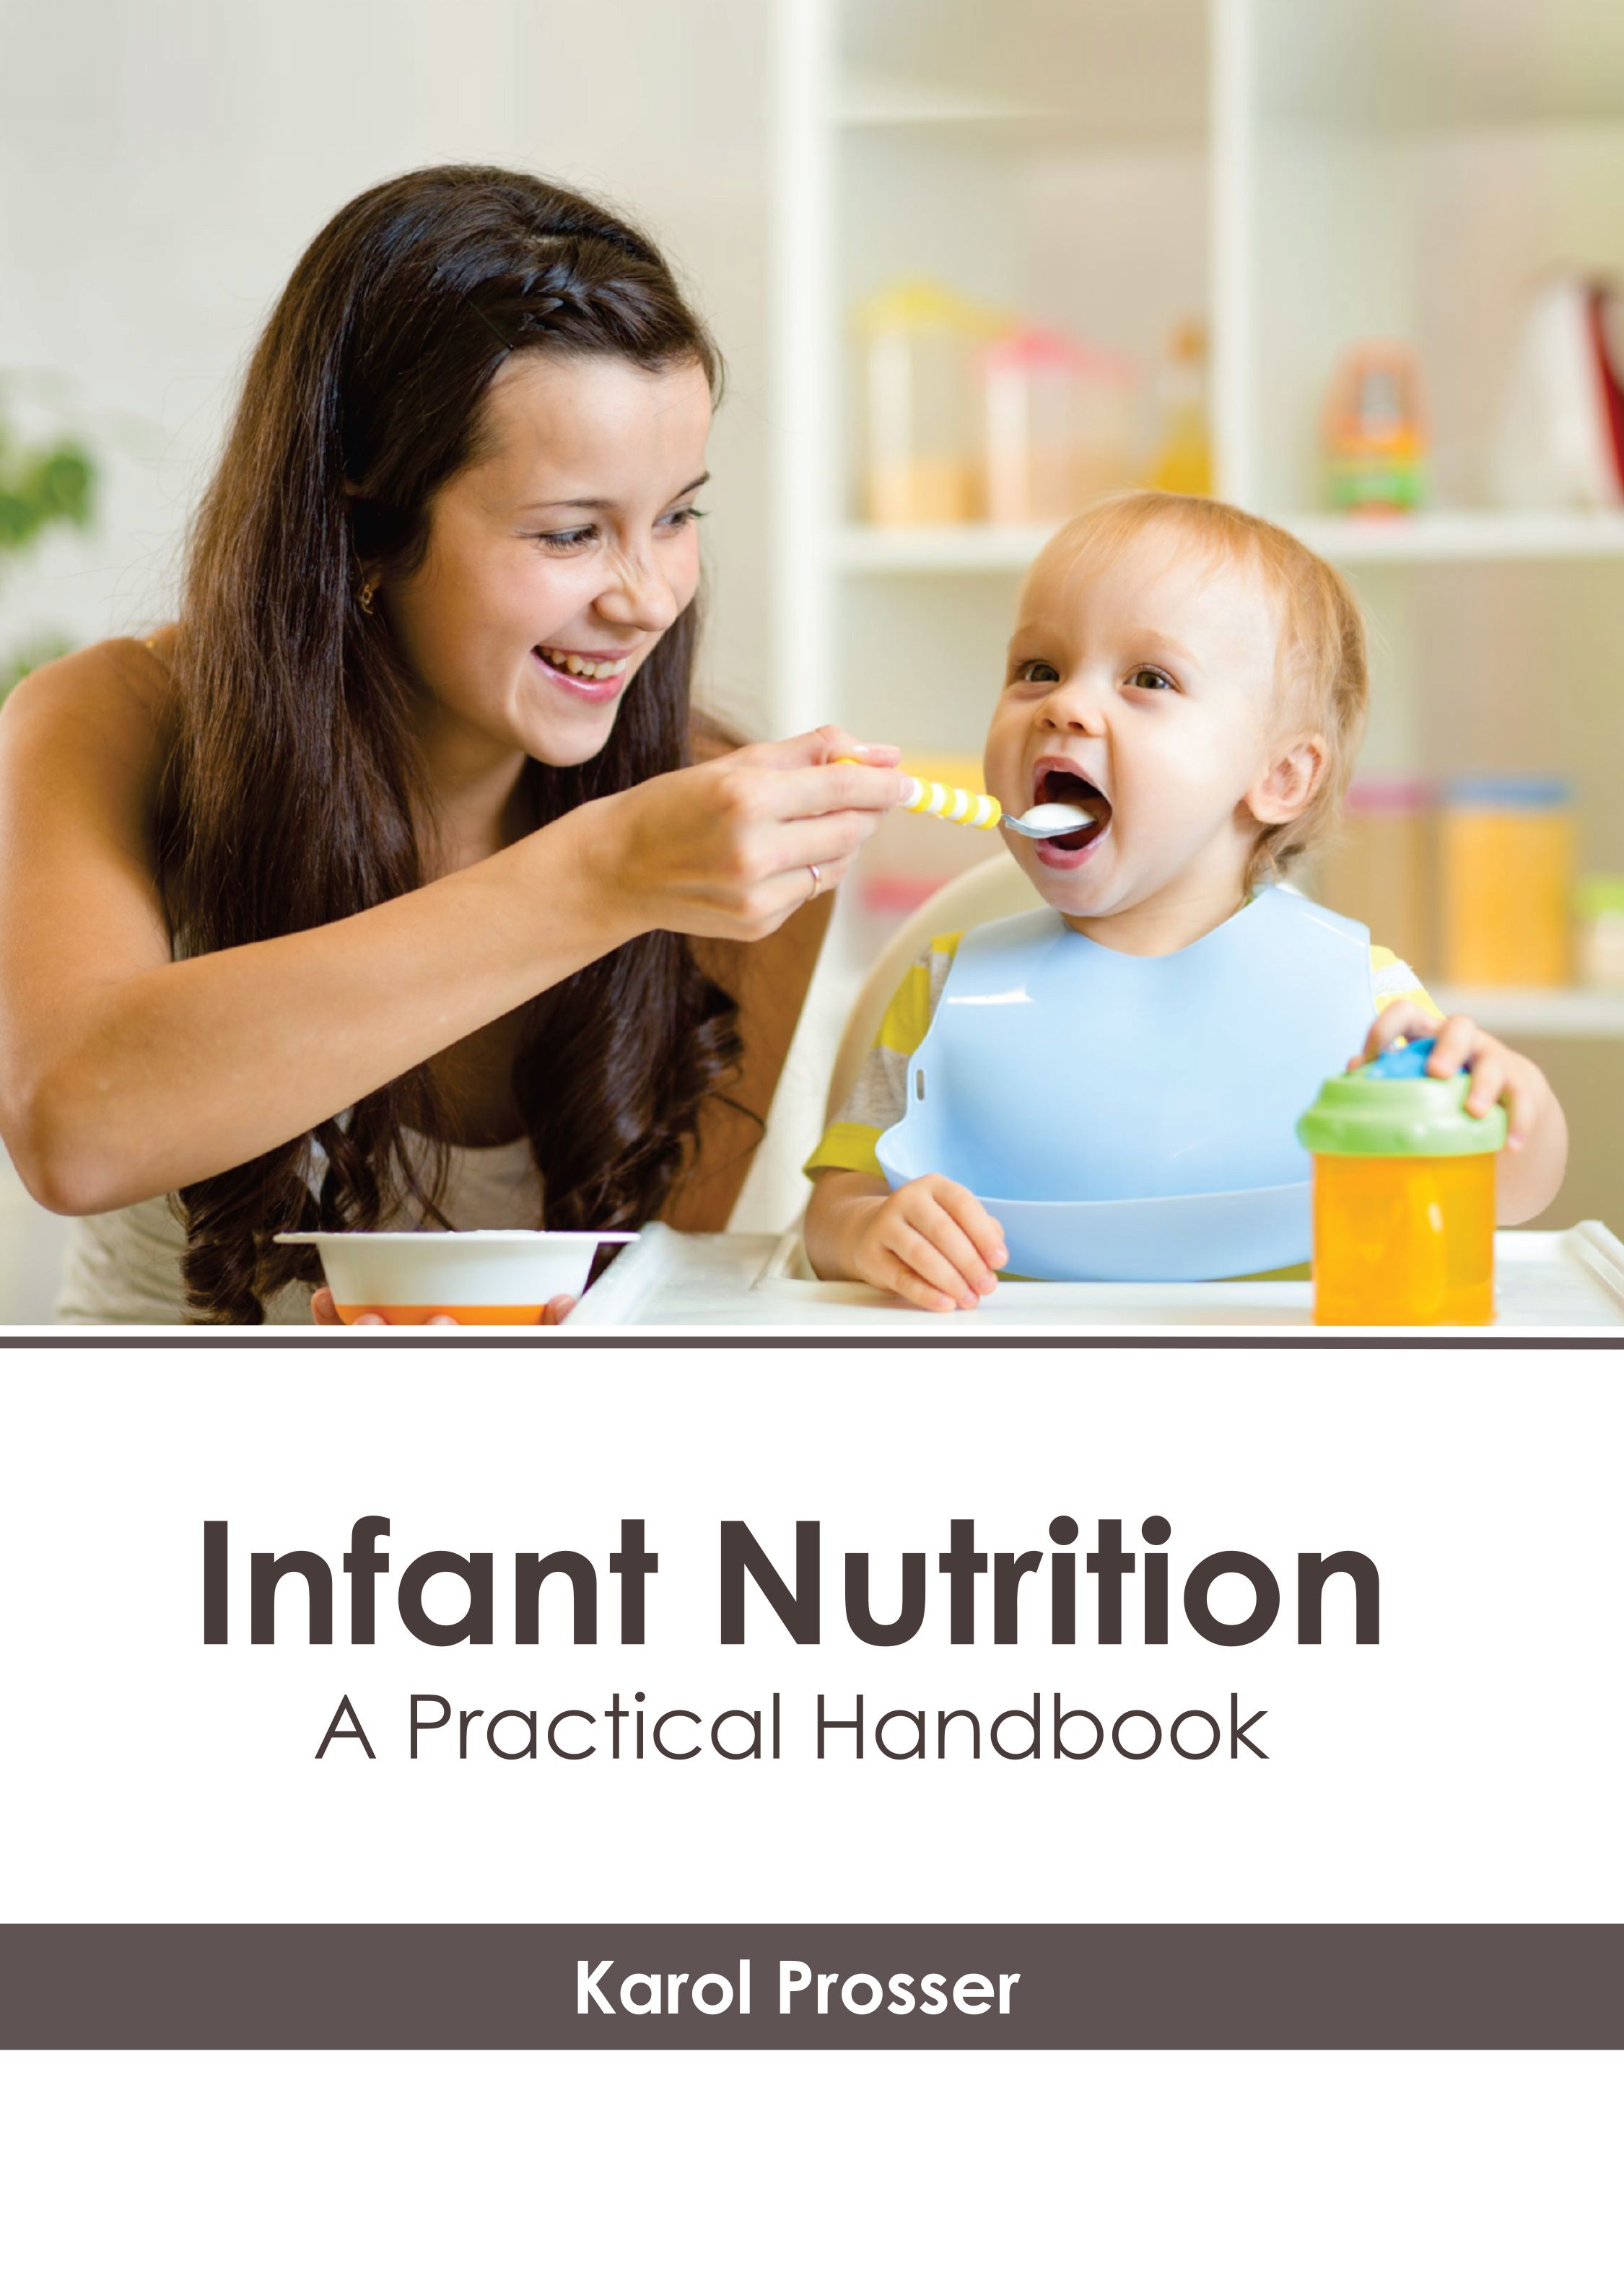 

exclusive-publishers/american-medical-publishers/infant-nutrition-a-practical-handbook-9781639276974